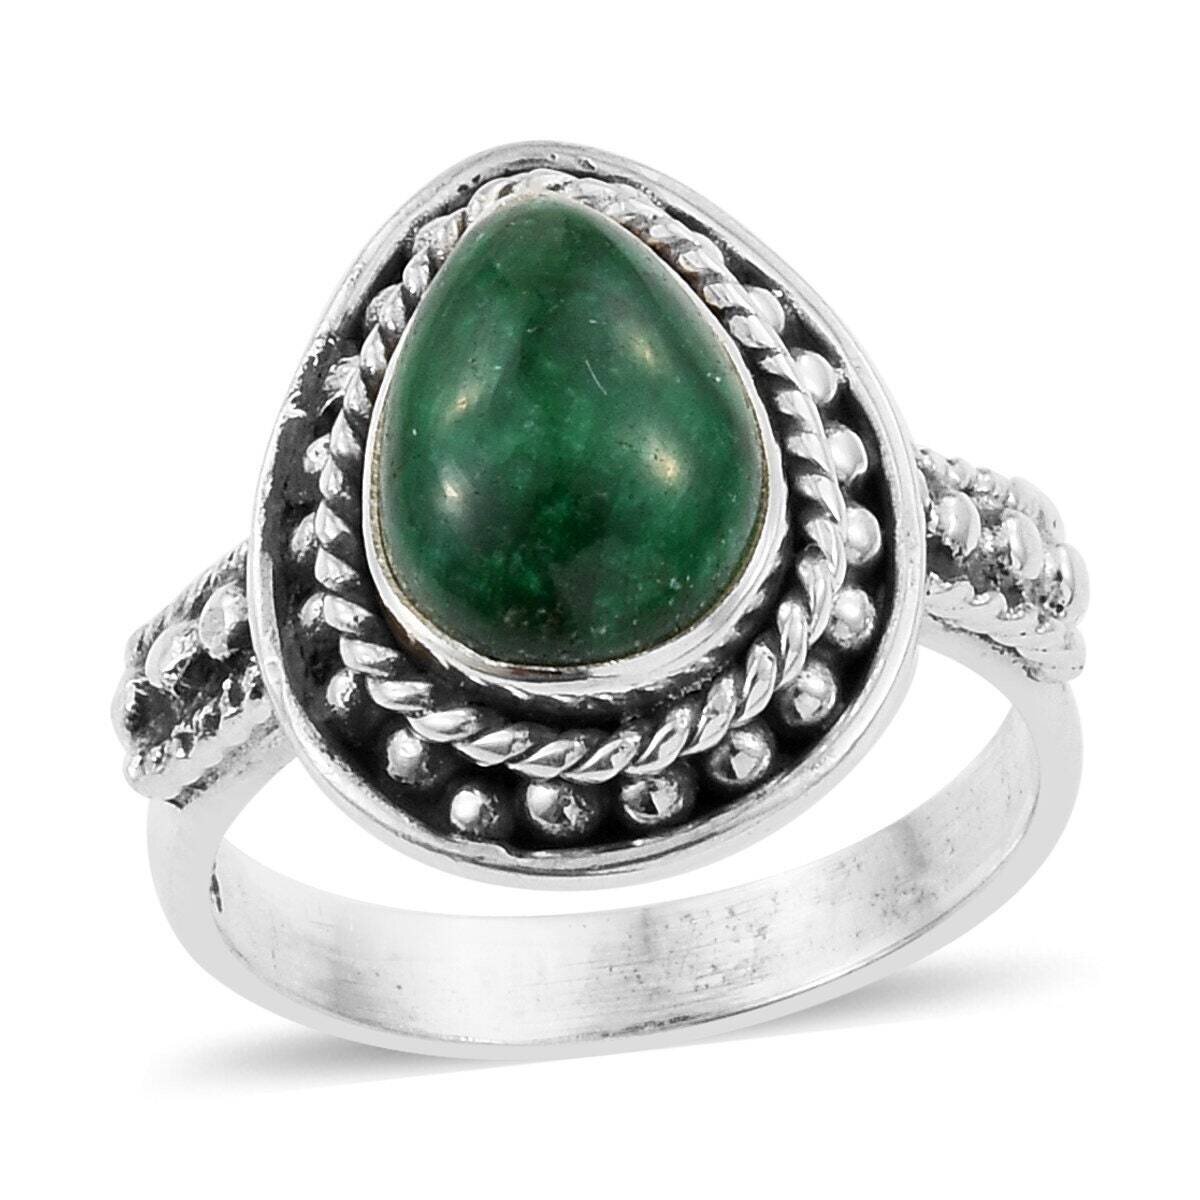 Emerald AAA+Quality Gemstone Ring Pear Stone Boho Ring 925-Sterling Solid Silver Ring,Middle Finger Ring Etsy Cyber Valentine's Day Gift